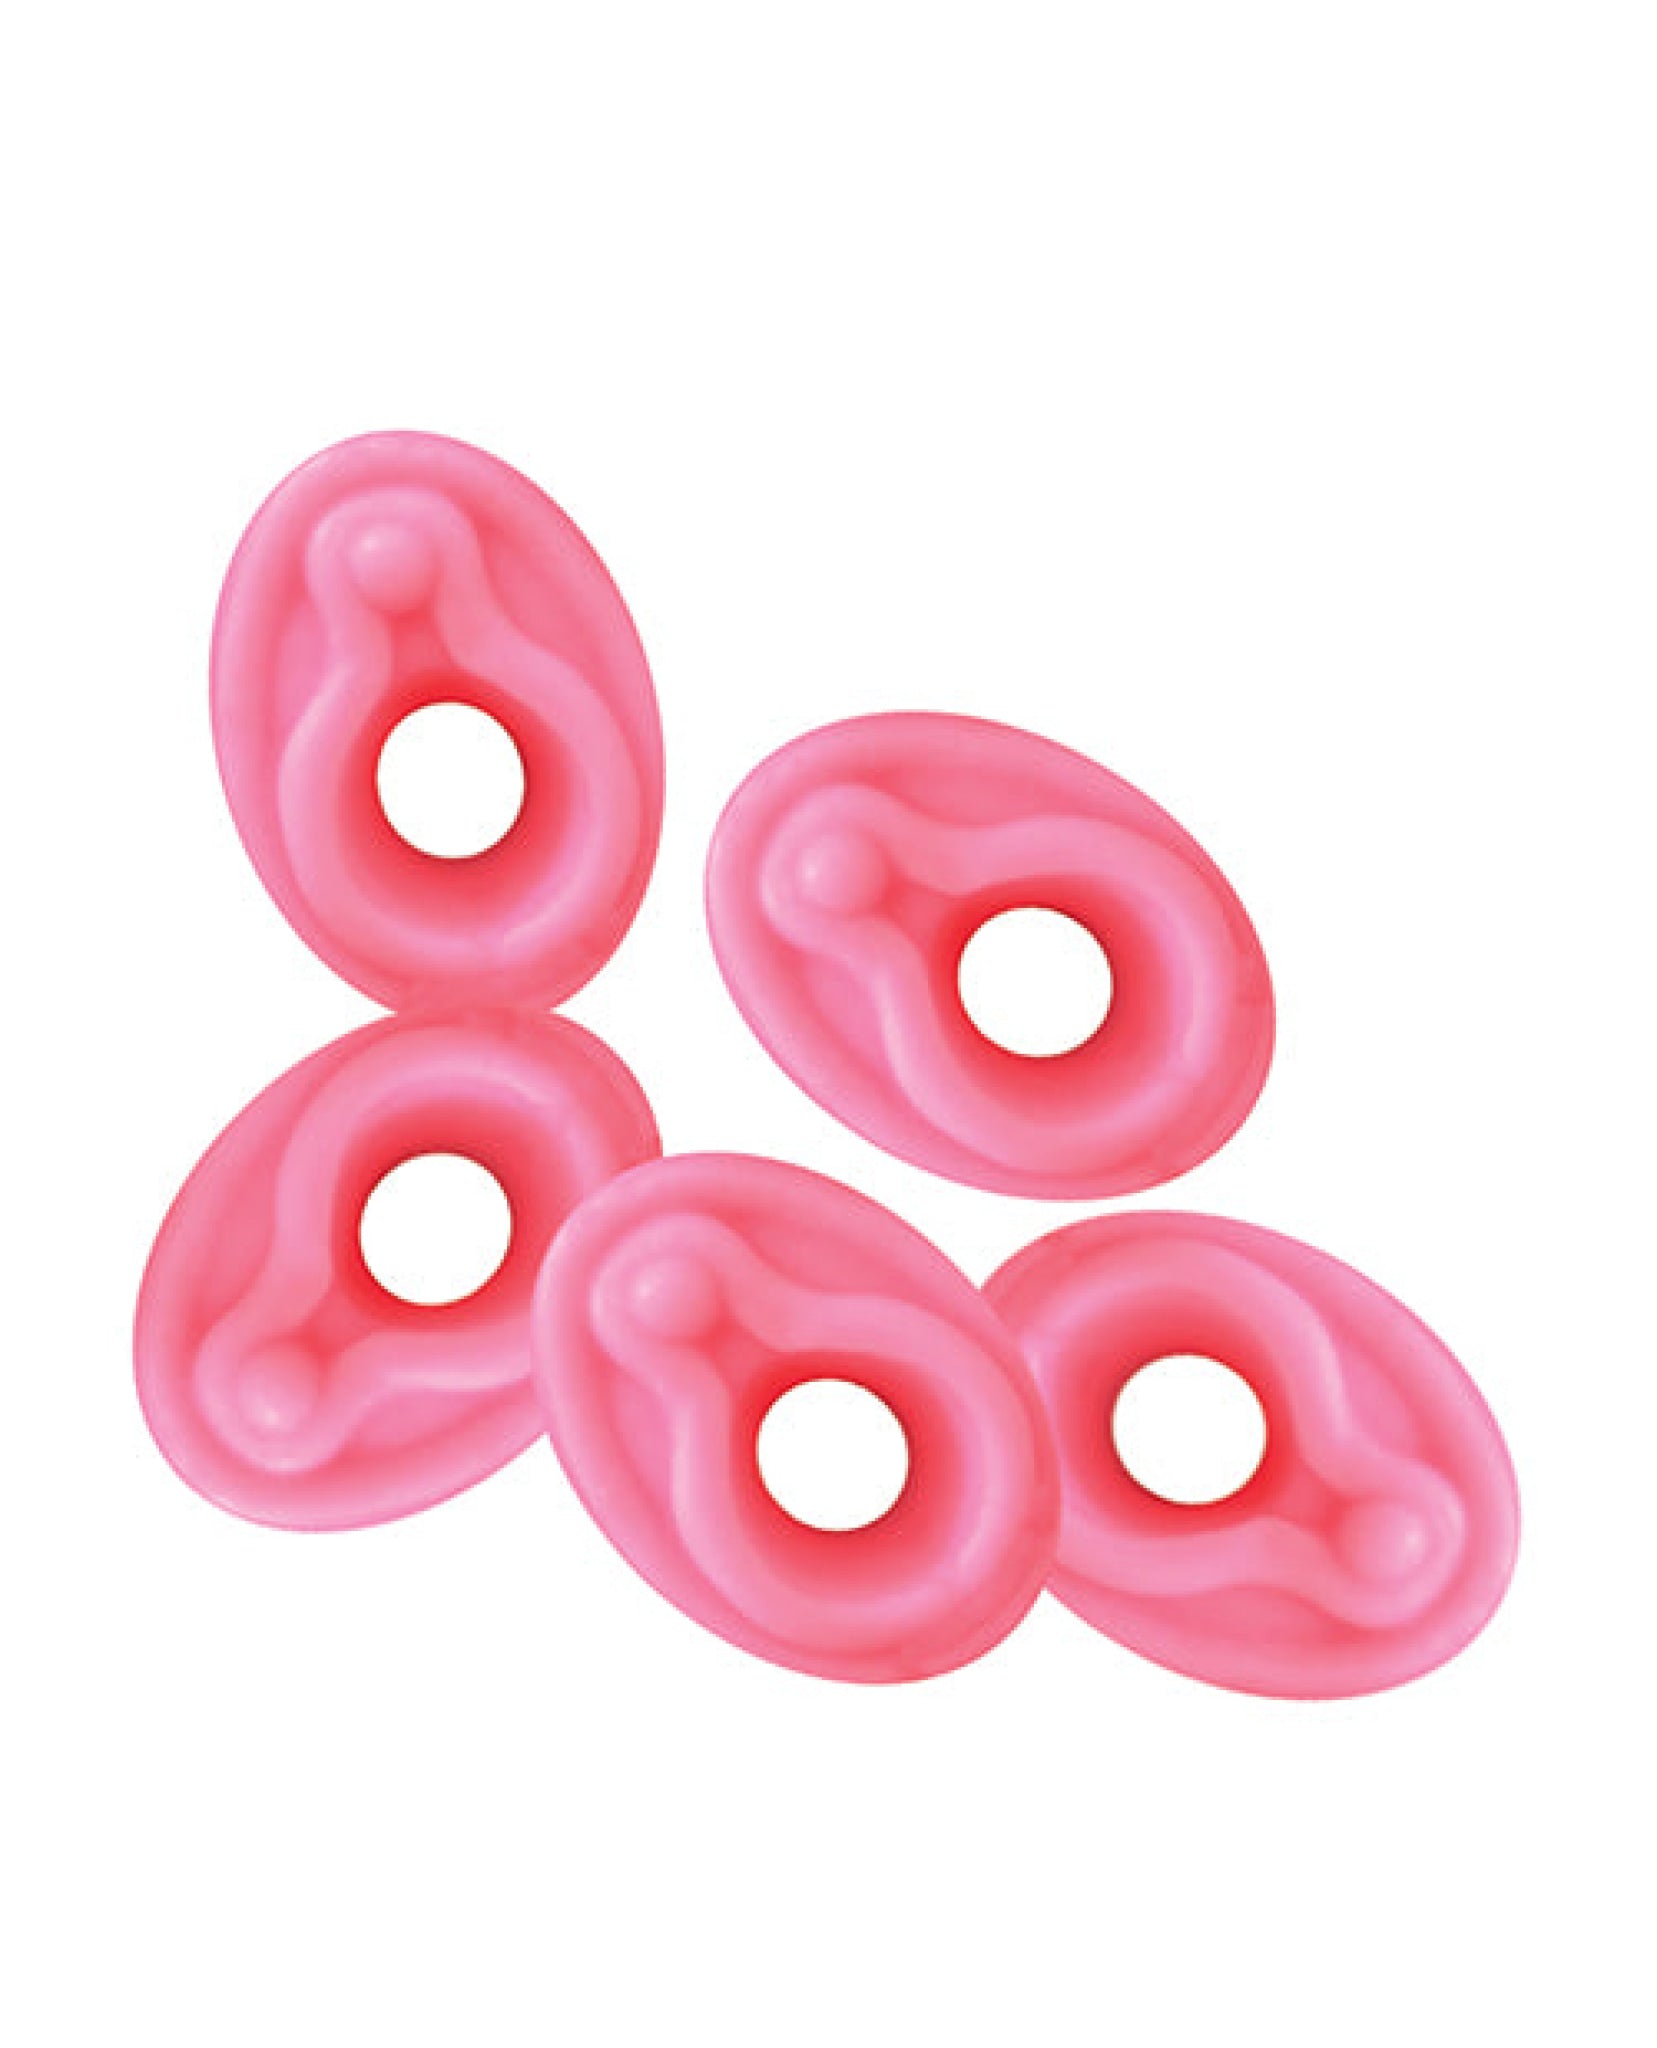 Clit Lickers Clit Shaped Gummies - Raspberry Hott Products